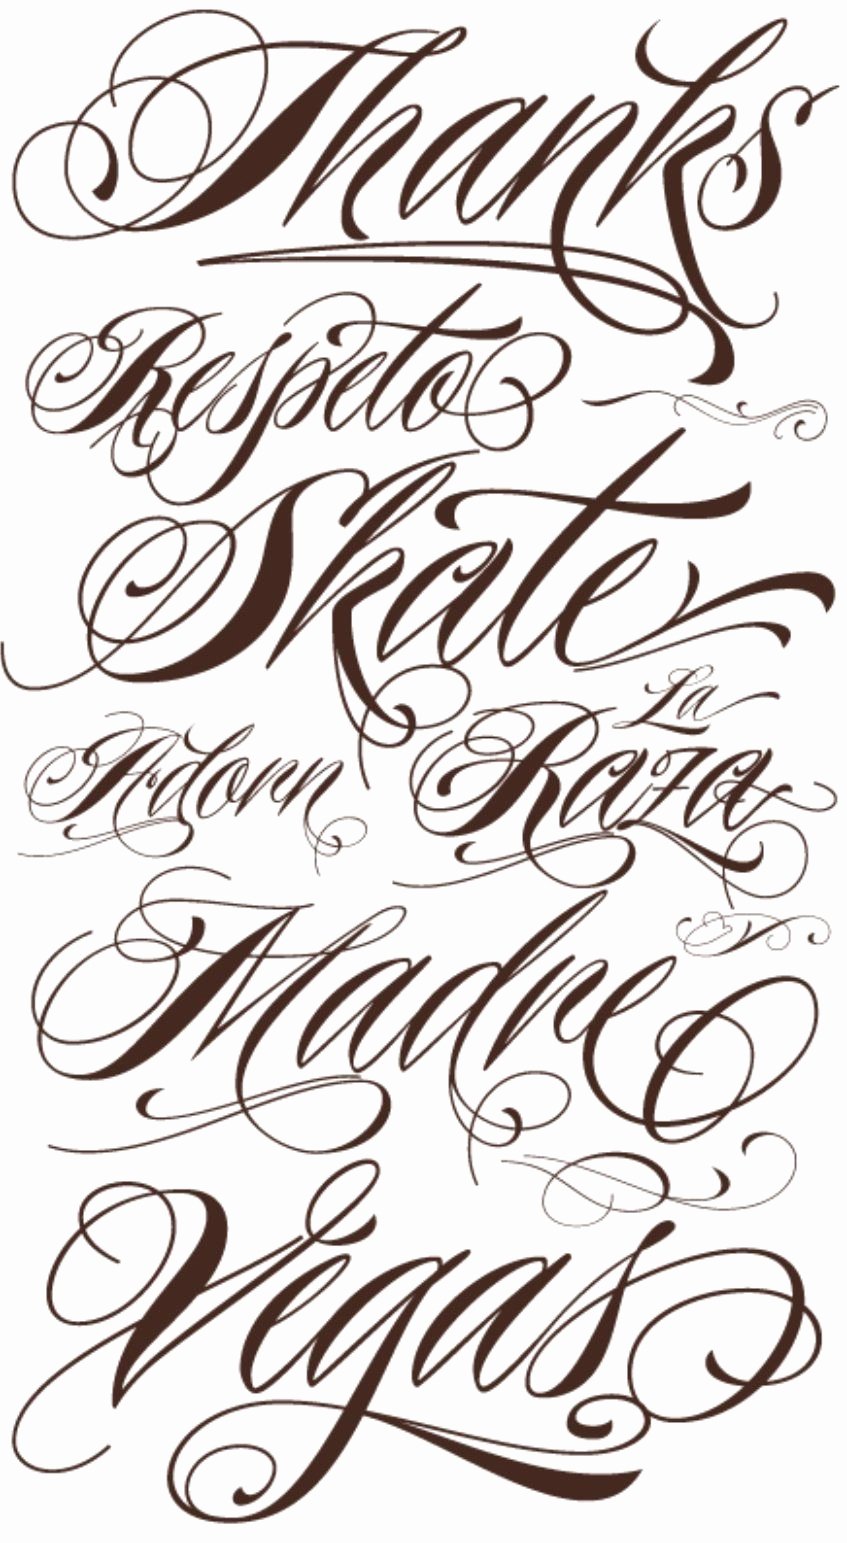 Fancy Cursive Fonts for Tattoos Inspirational Fancy Cursive Fonts Alphabet for Tattoos Fancy Cursive